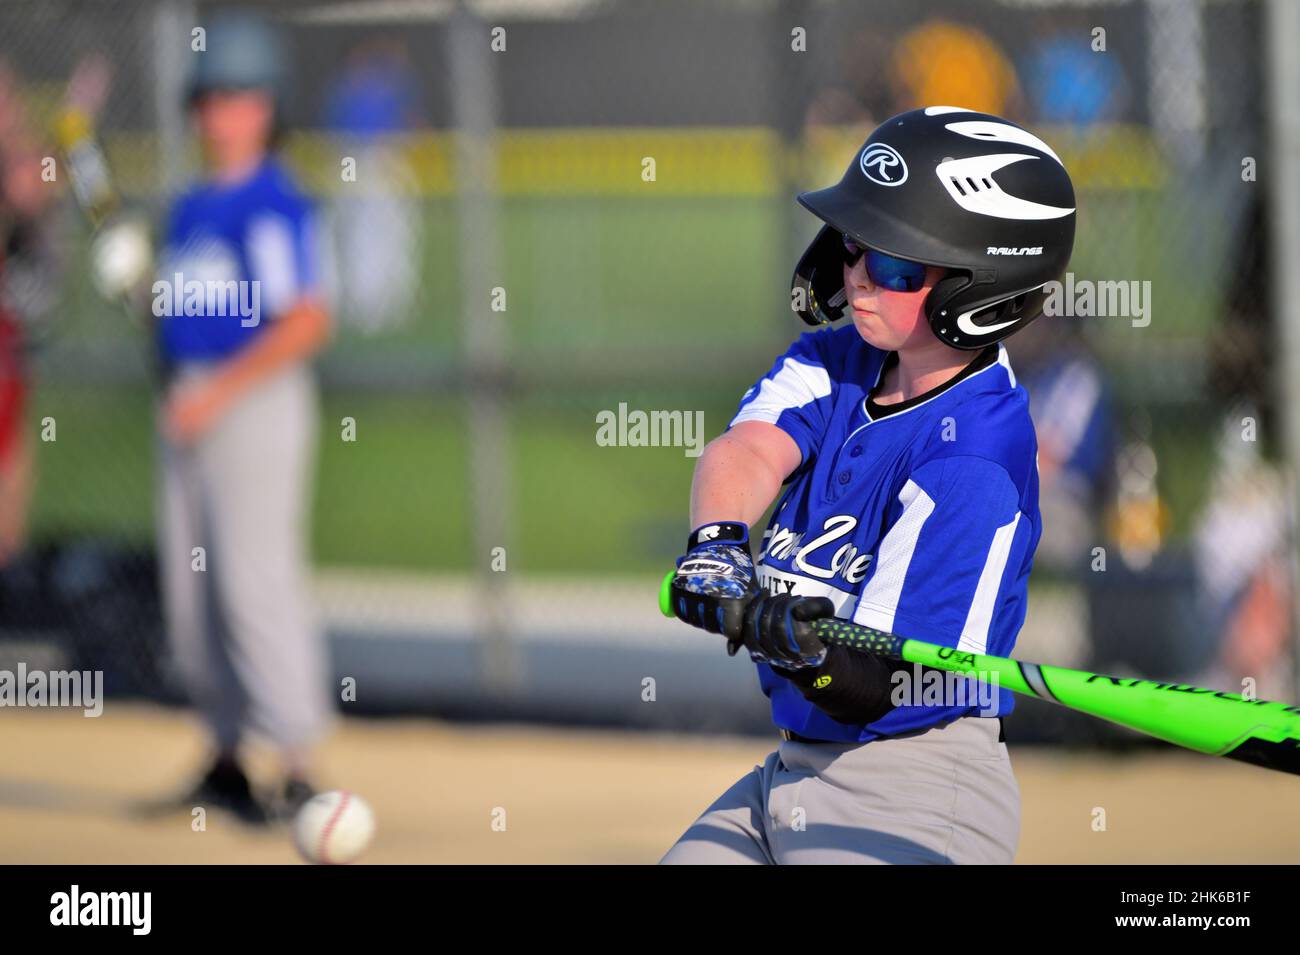 Sycamore, Illinois, USA. A young teen swinging at a pitch during a youth league baseball game. Stock Photo